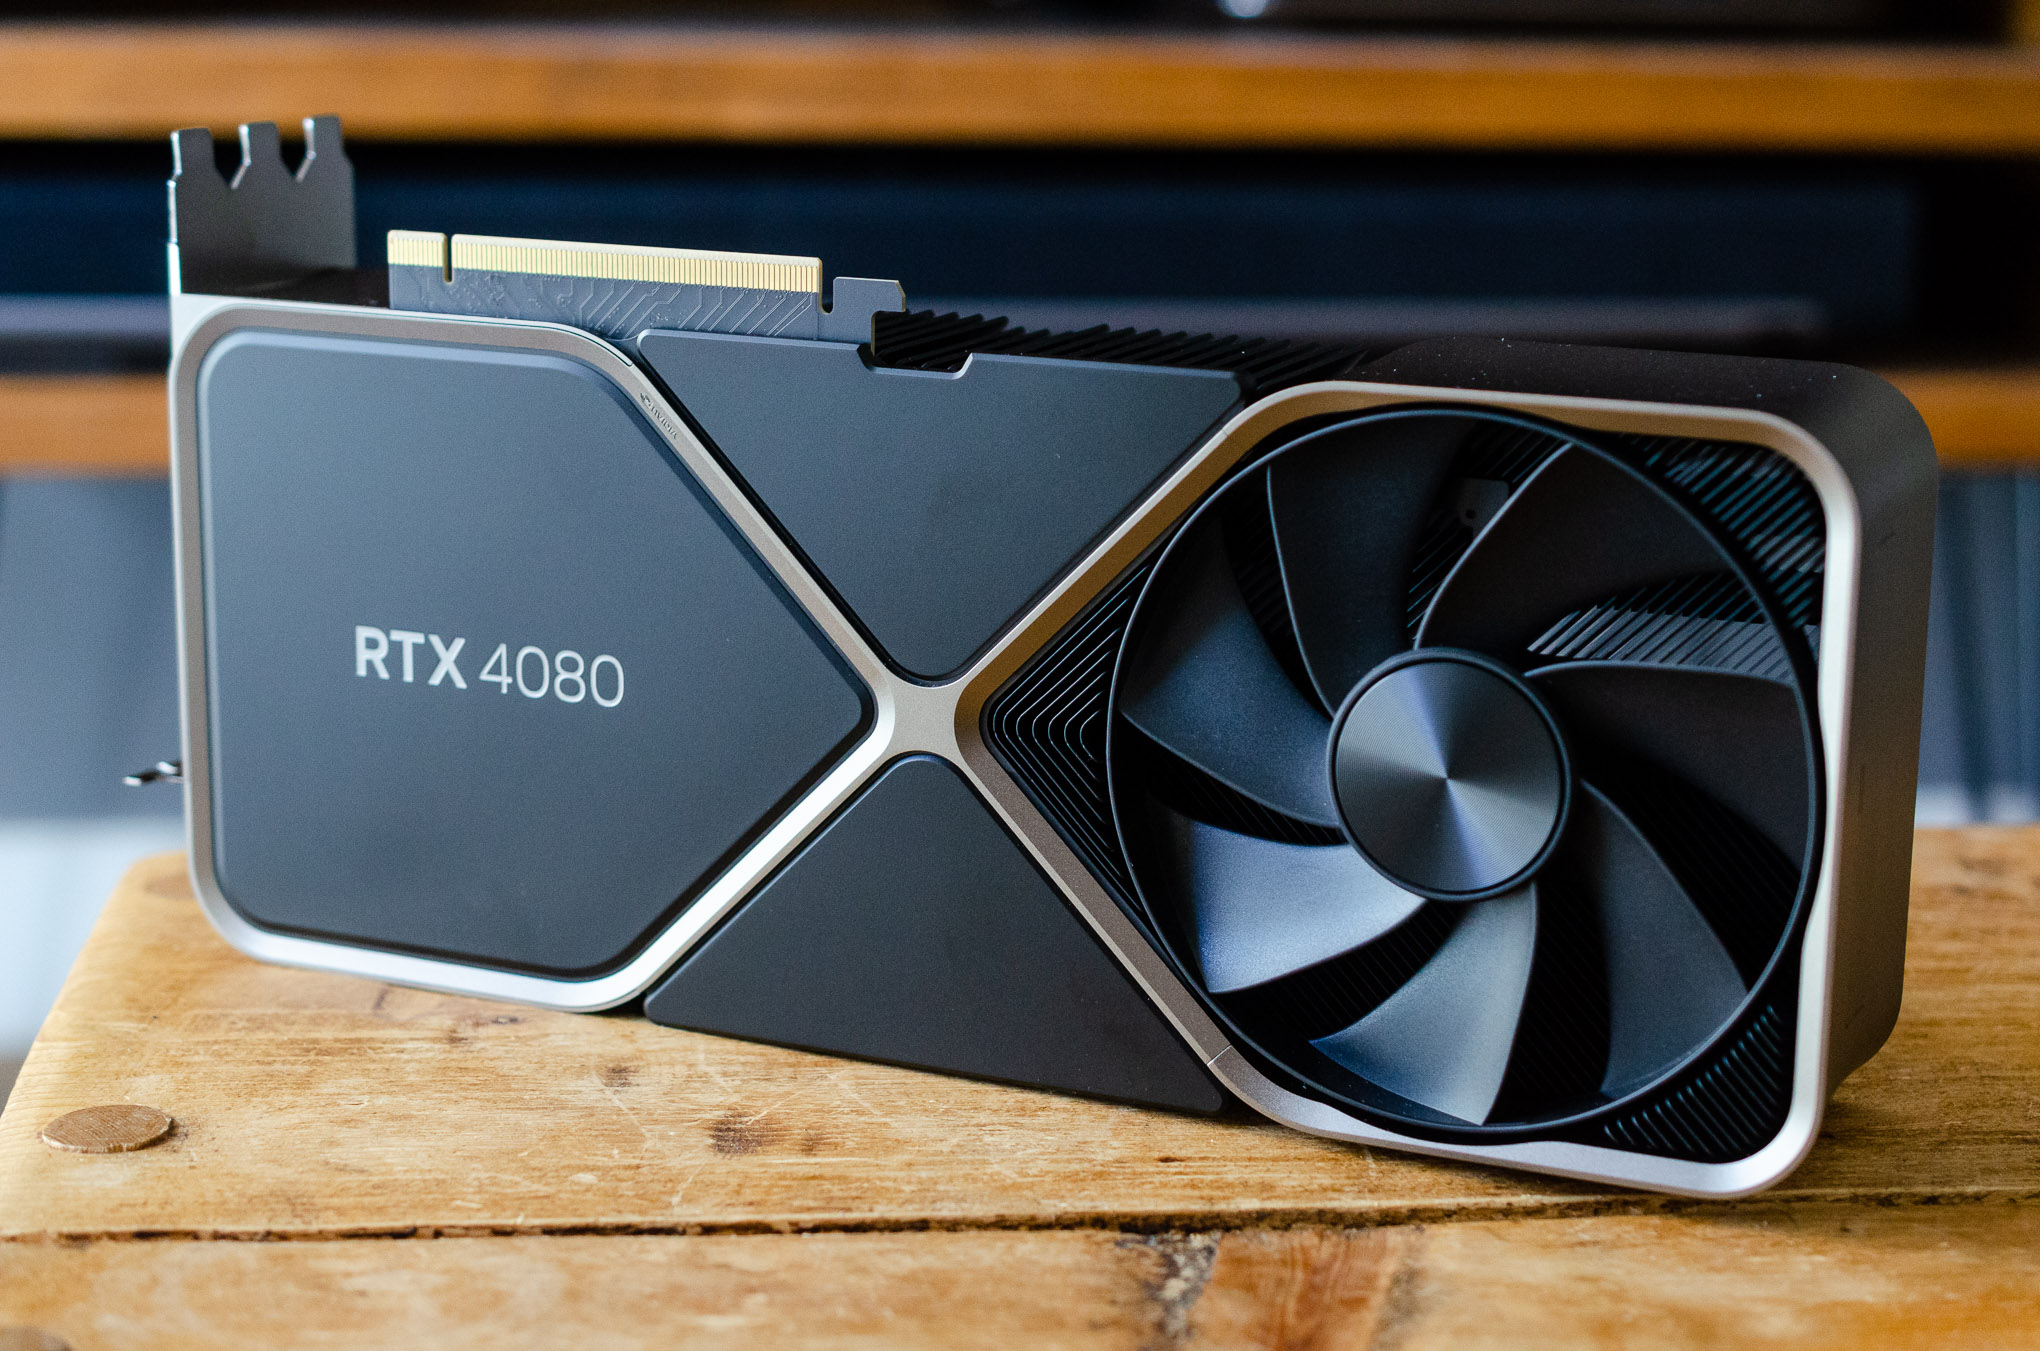 Nvidia’s RTX 4080 Founders Edition GPU on a wooden table